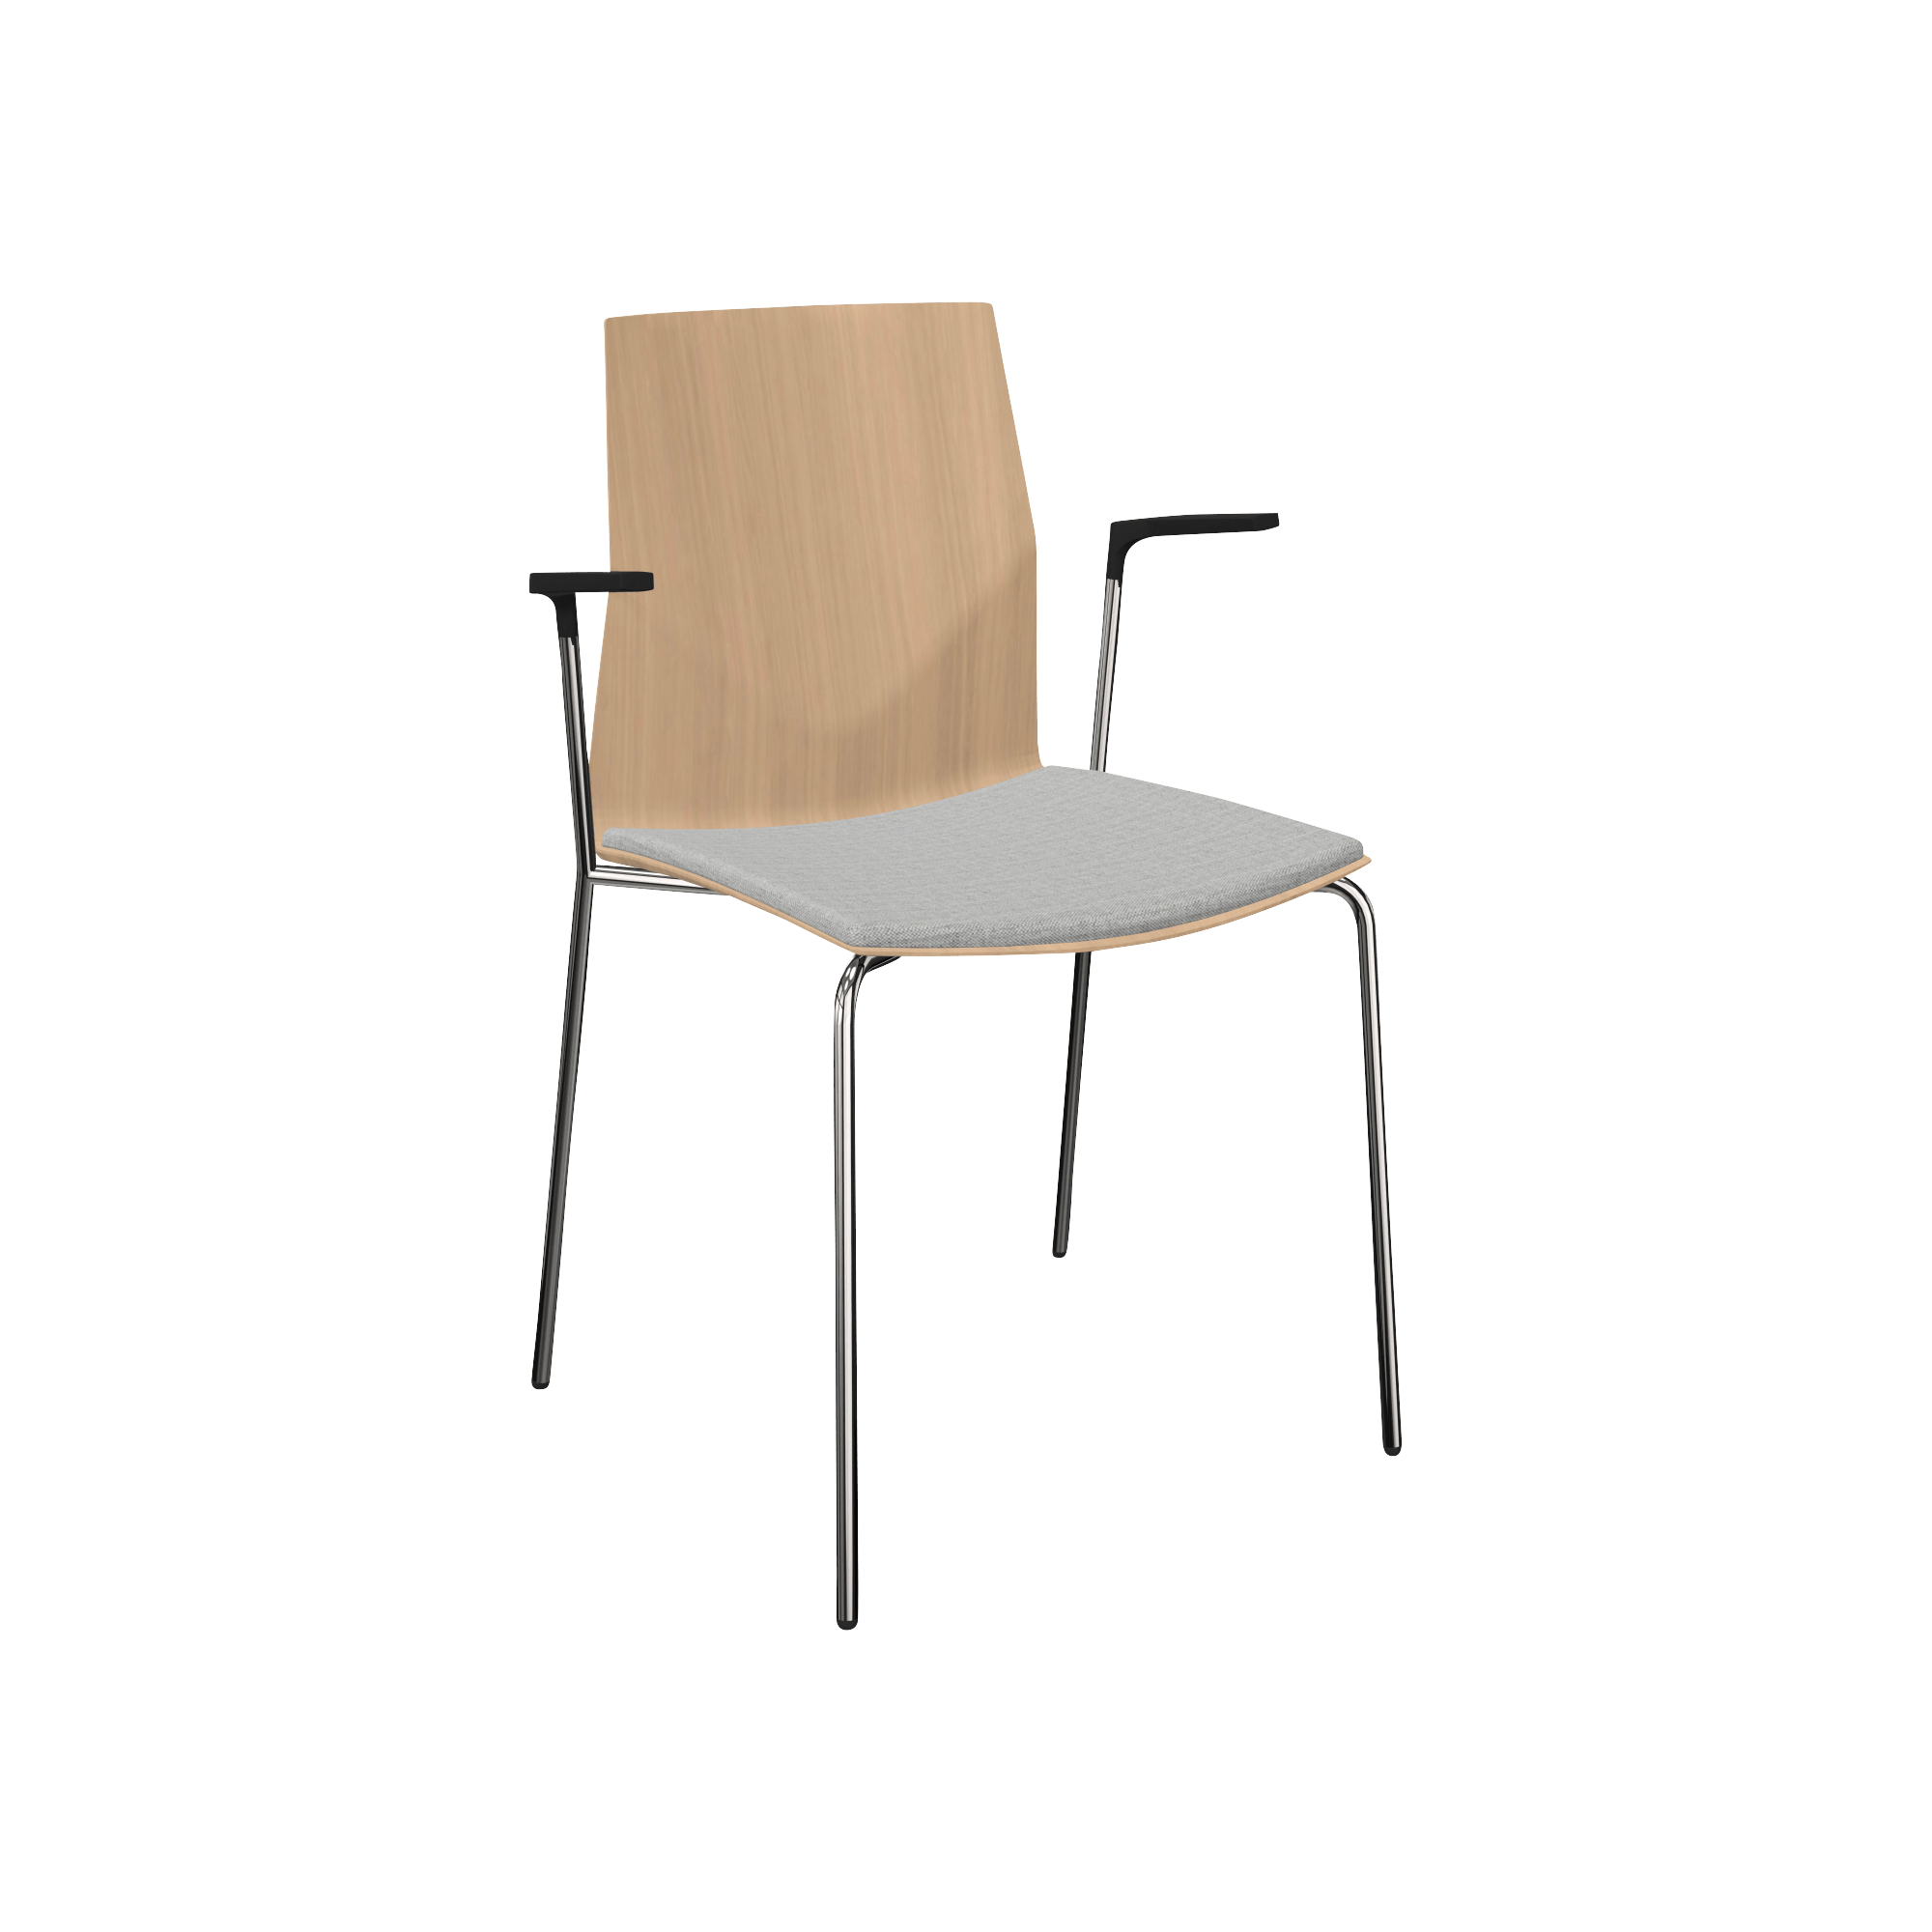 wooden chair with grey seat and metal legs and black arm rests